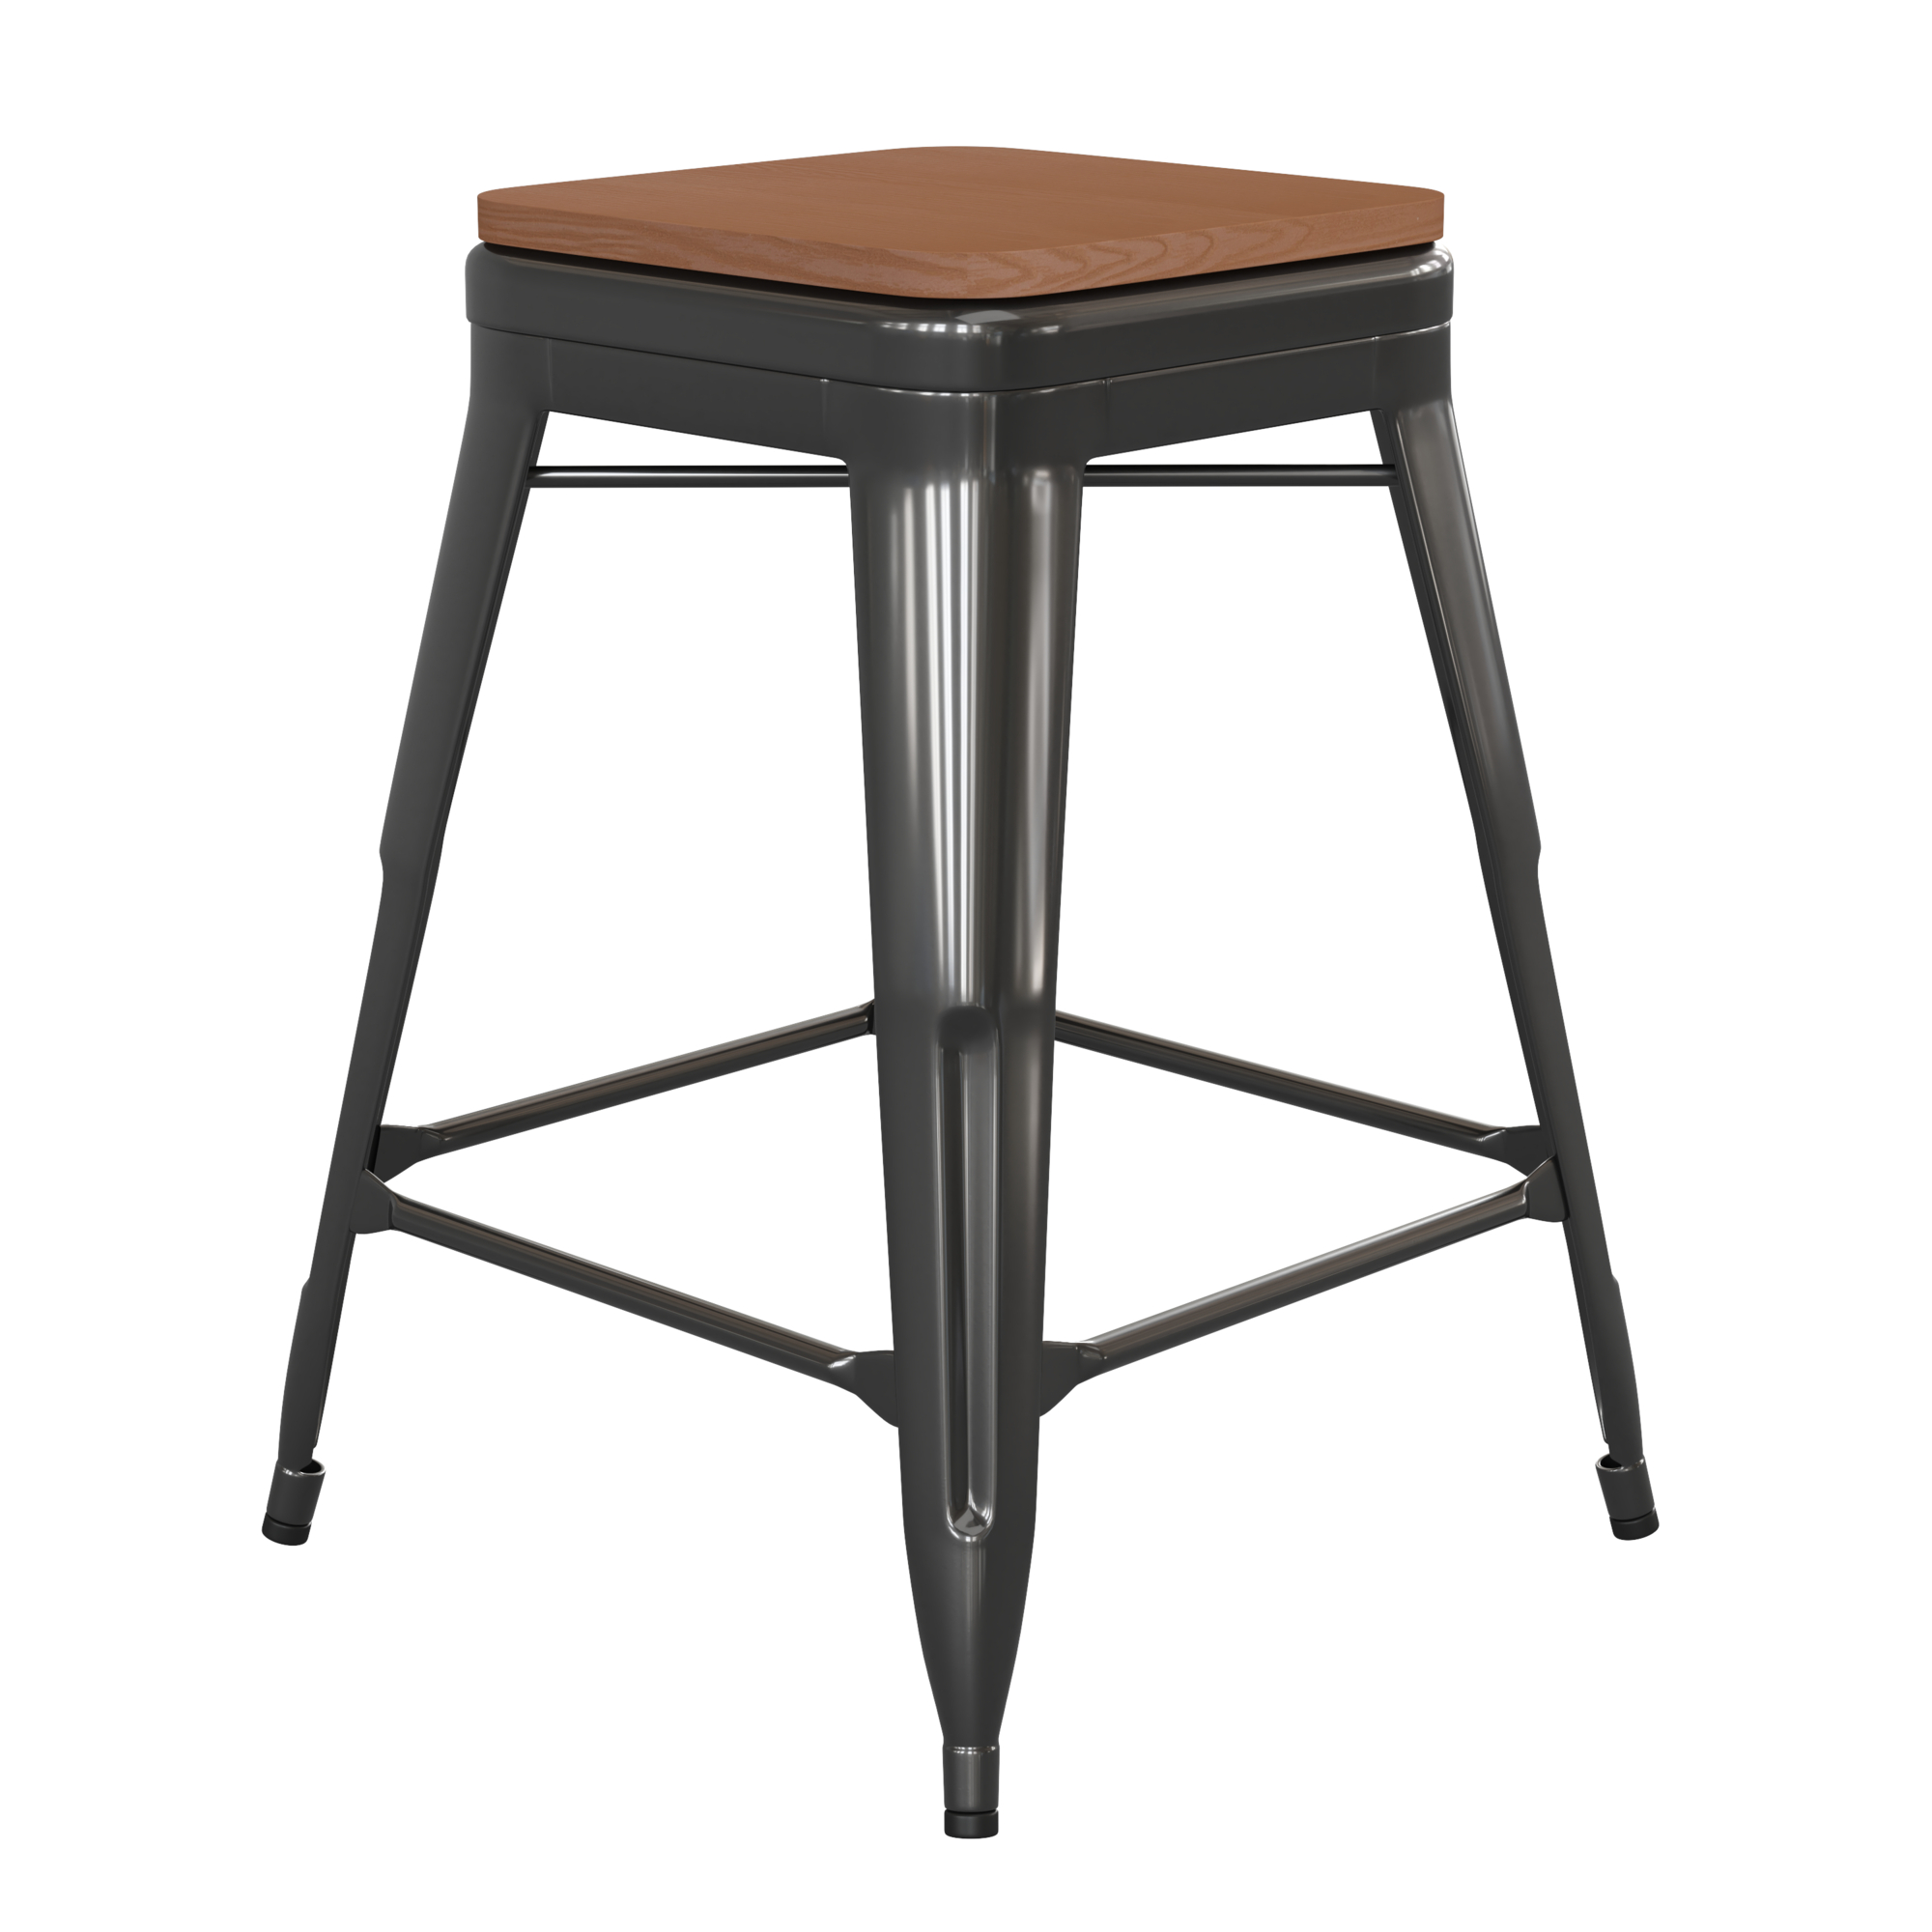 Flash Furniture, 24Inch Black Metal Stool-Teak Poly Seat, Primary Color Black, Included (qty.) 1, Model CH3132024BKPL2T